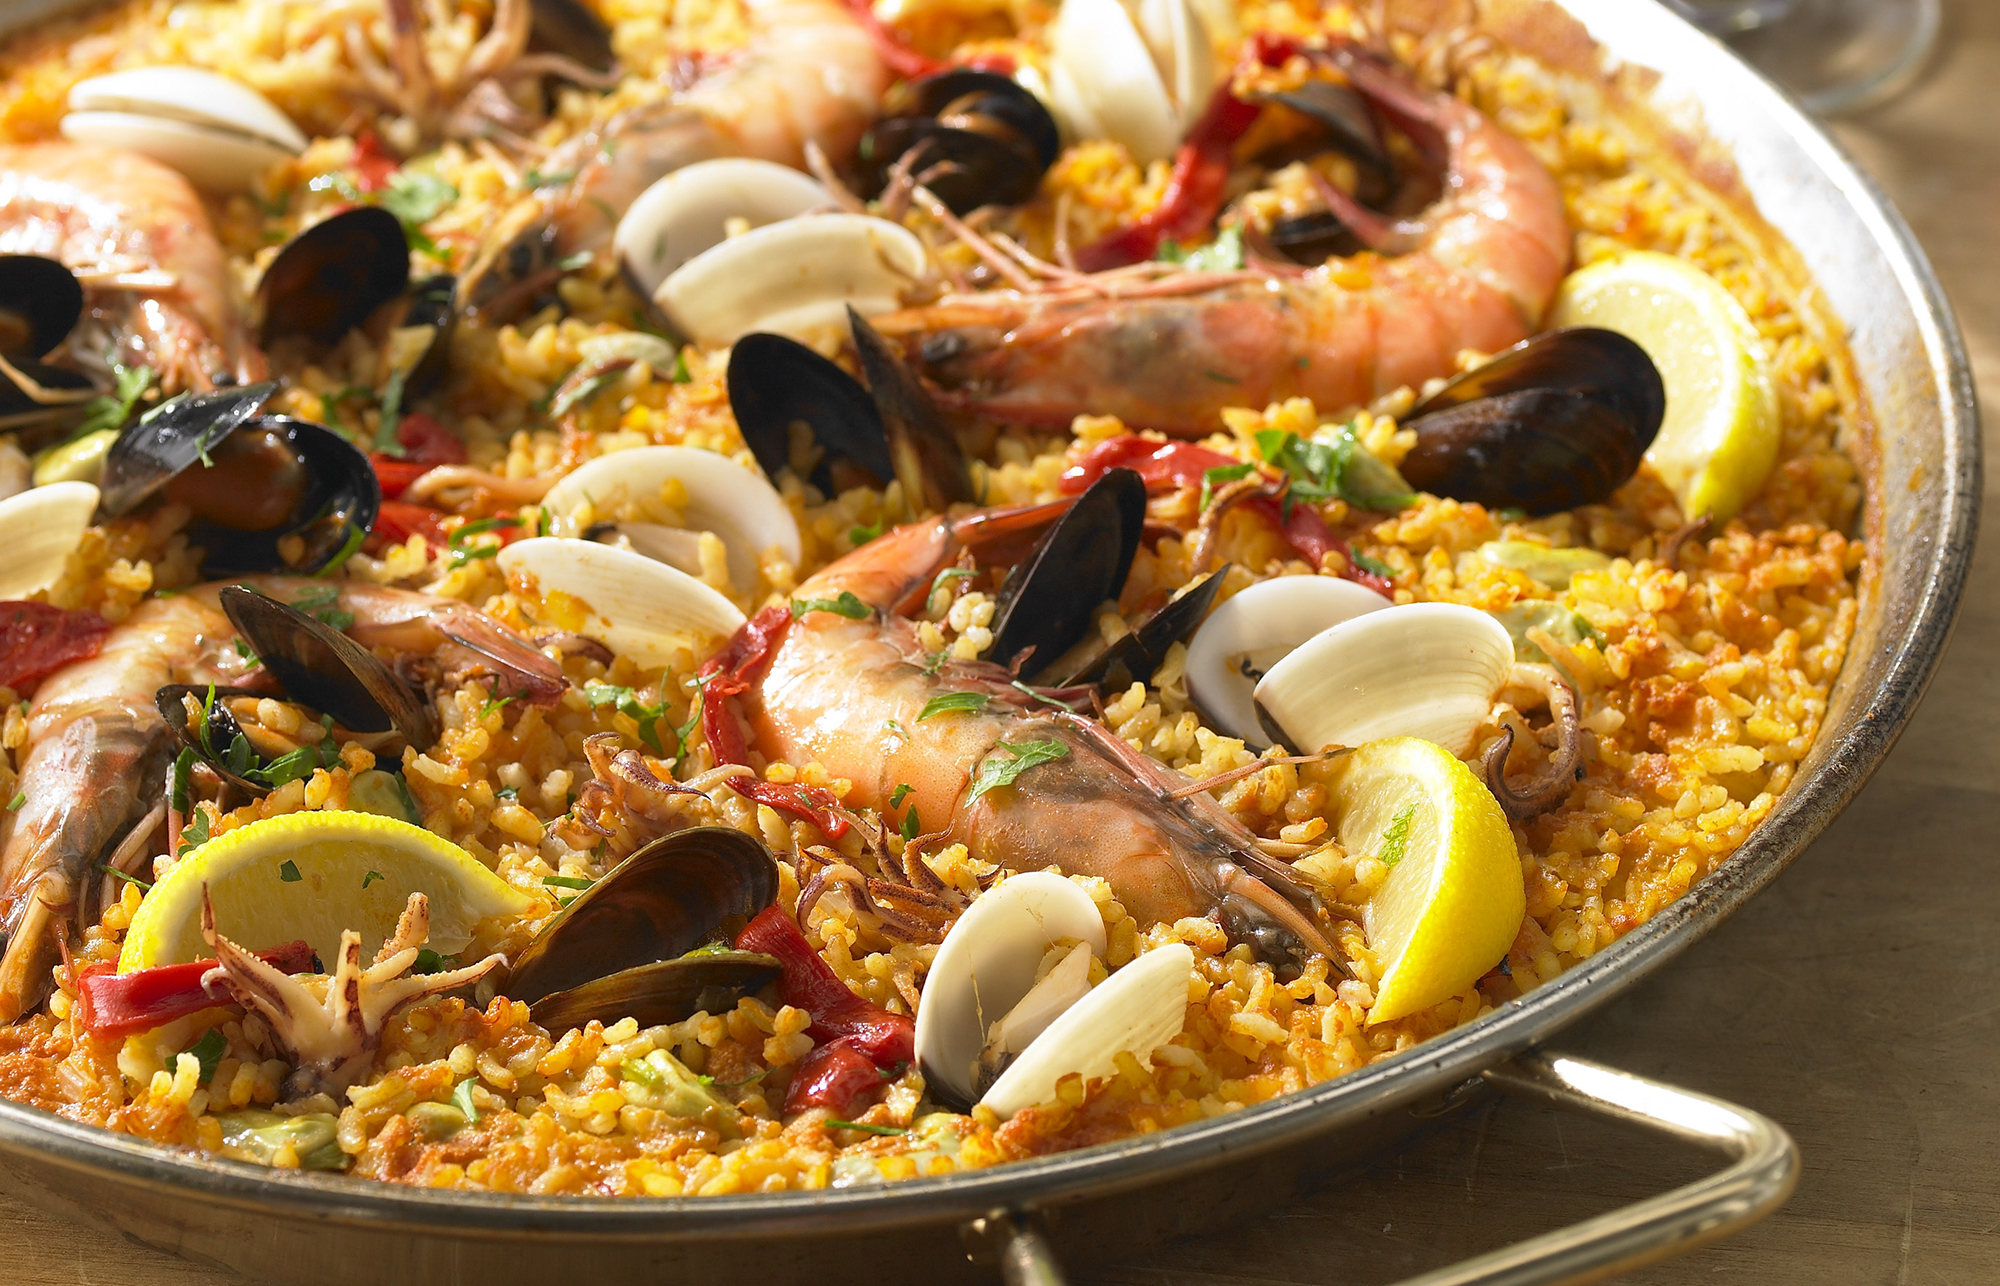 Seafood & Chicken Paella with Peas